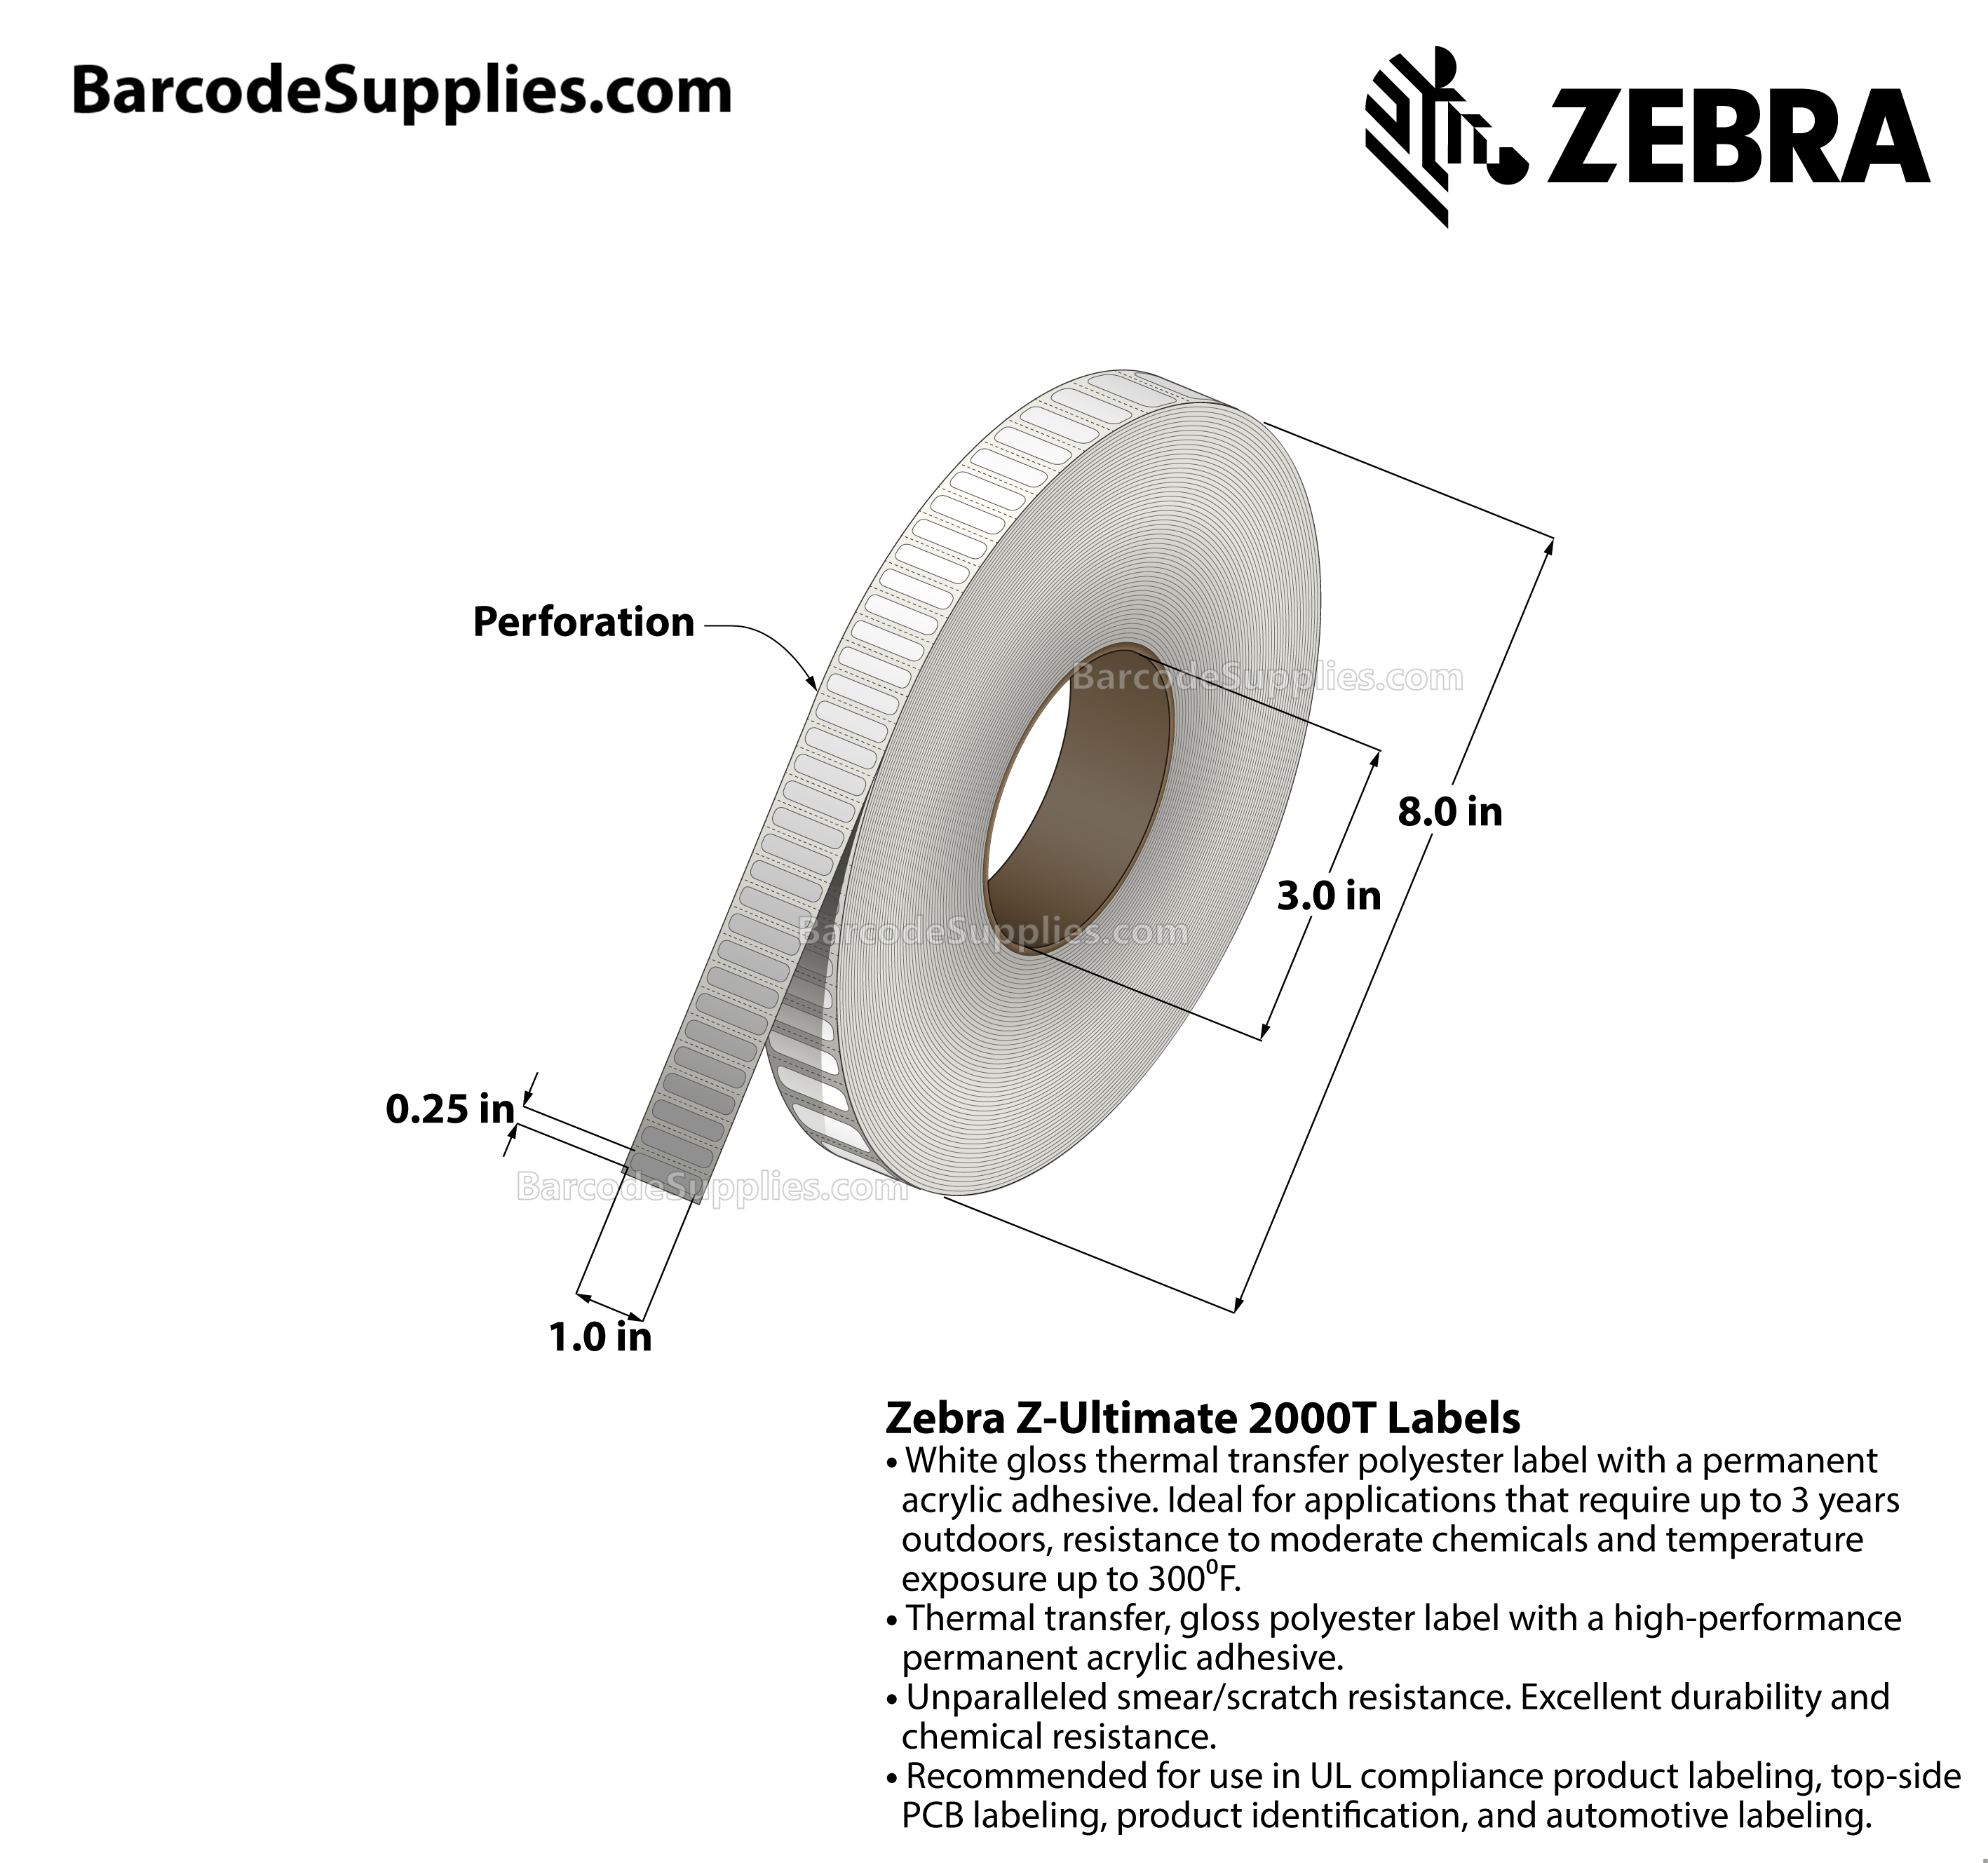 1 x 0.25 Thermal Transfer White Z-Ultimate 2000T Labels With Permanent Adhesive - Perforated - 16456 Labels Per Roll - Carton Of 4 Rolls - 65824 Labels Total - MPN: 10011975